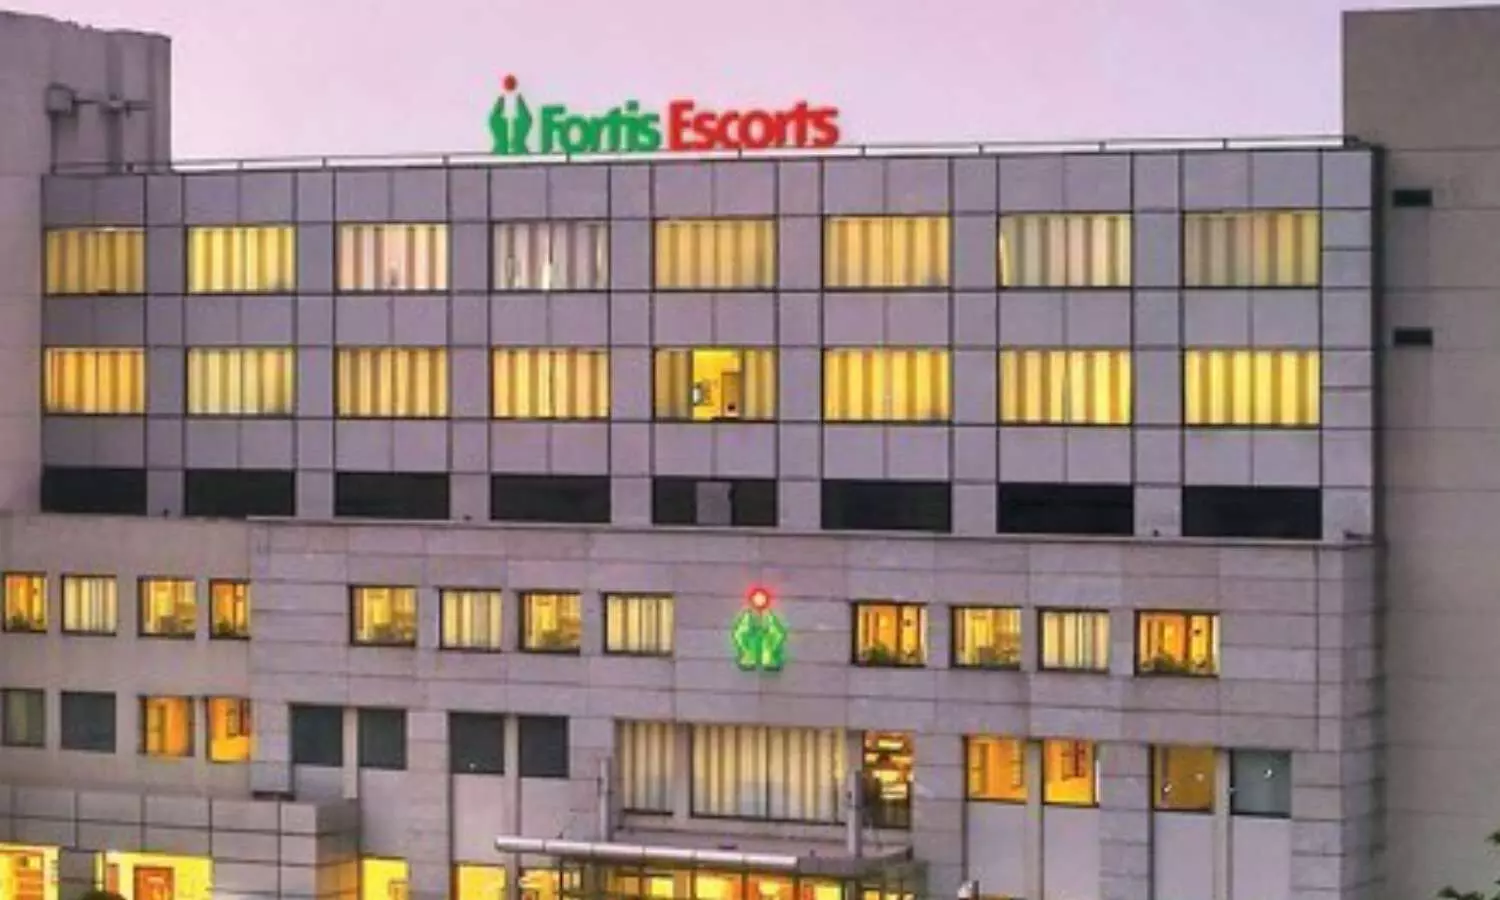 Fortis Escorts doctors perform fastest hip ball replacement surgery on 86-year-old patient in over 15 minutes